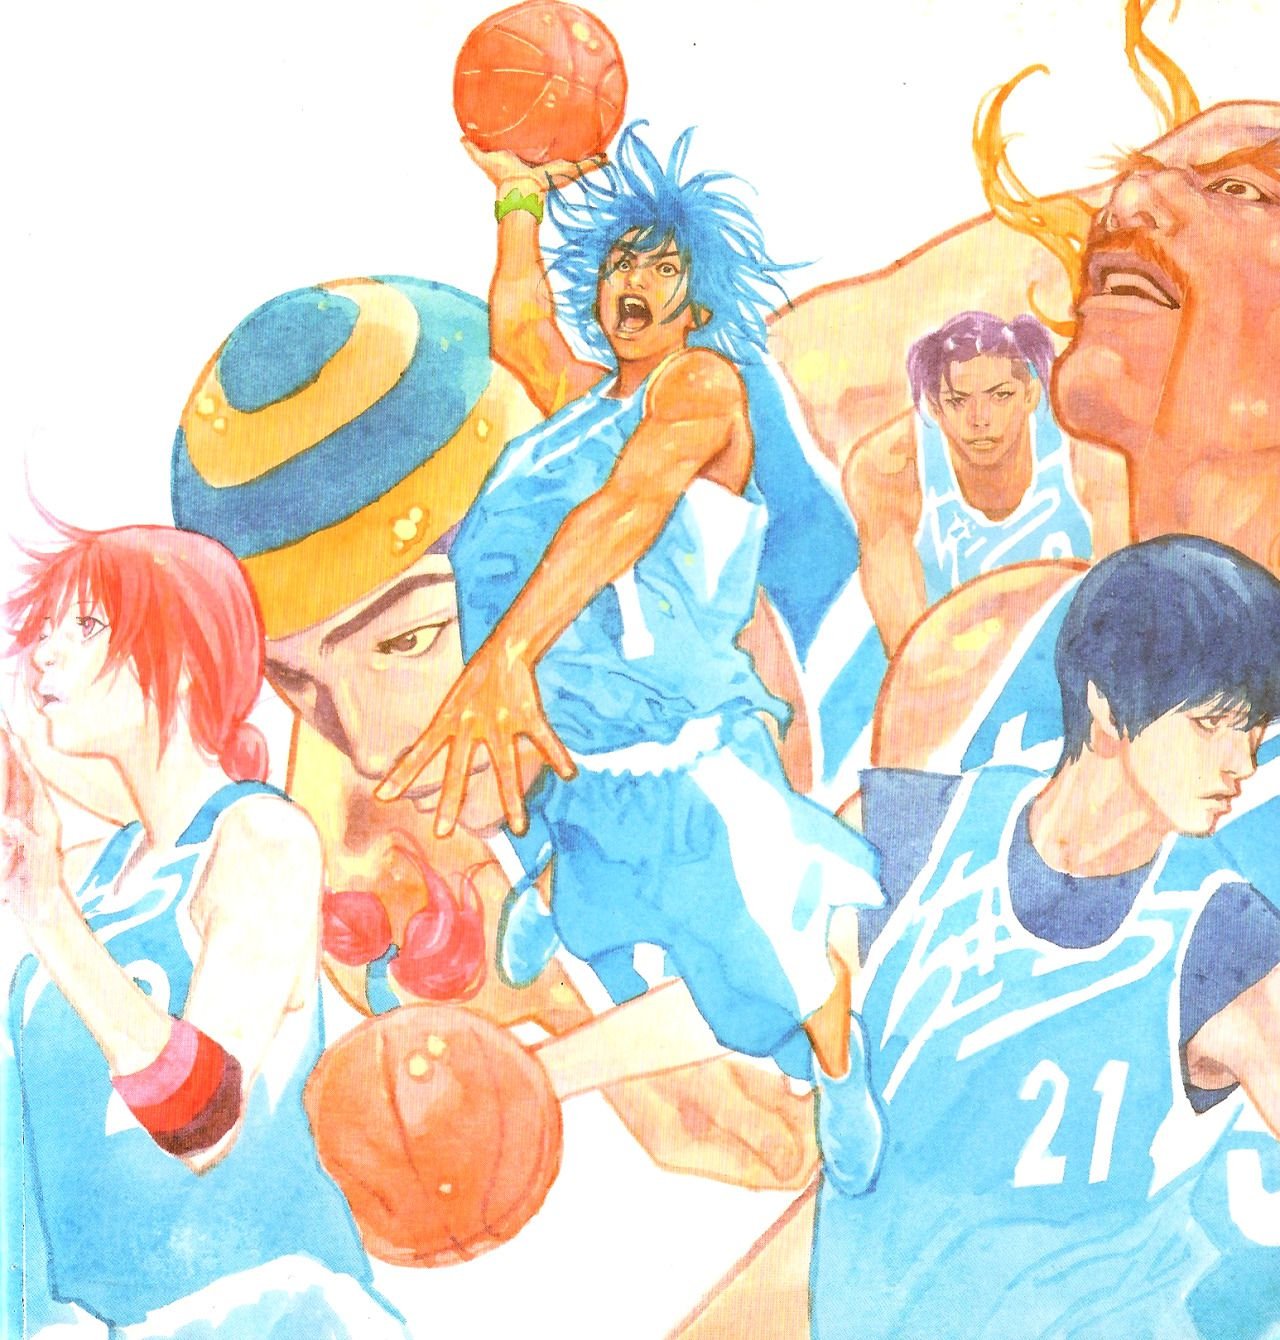 slam dunk 🏀 on X: If you love Slam Dunk, I highly recommend you